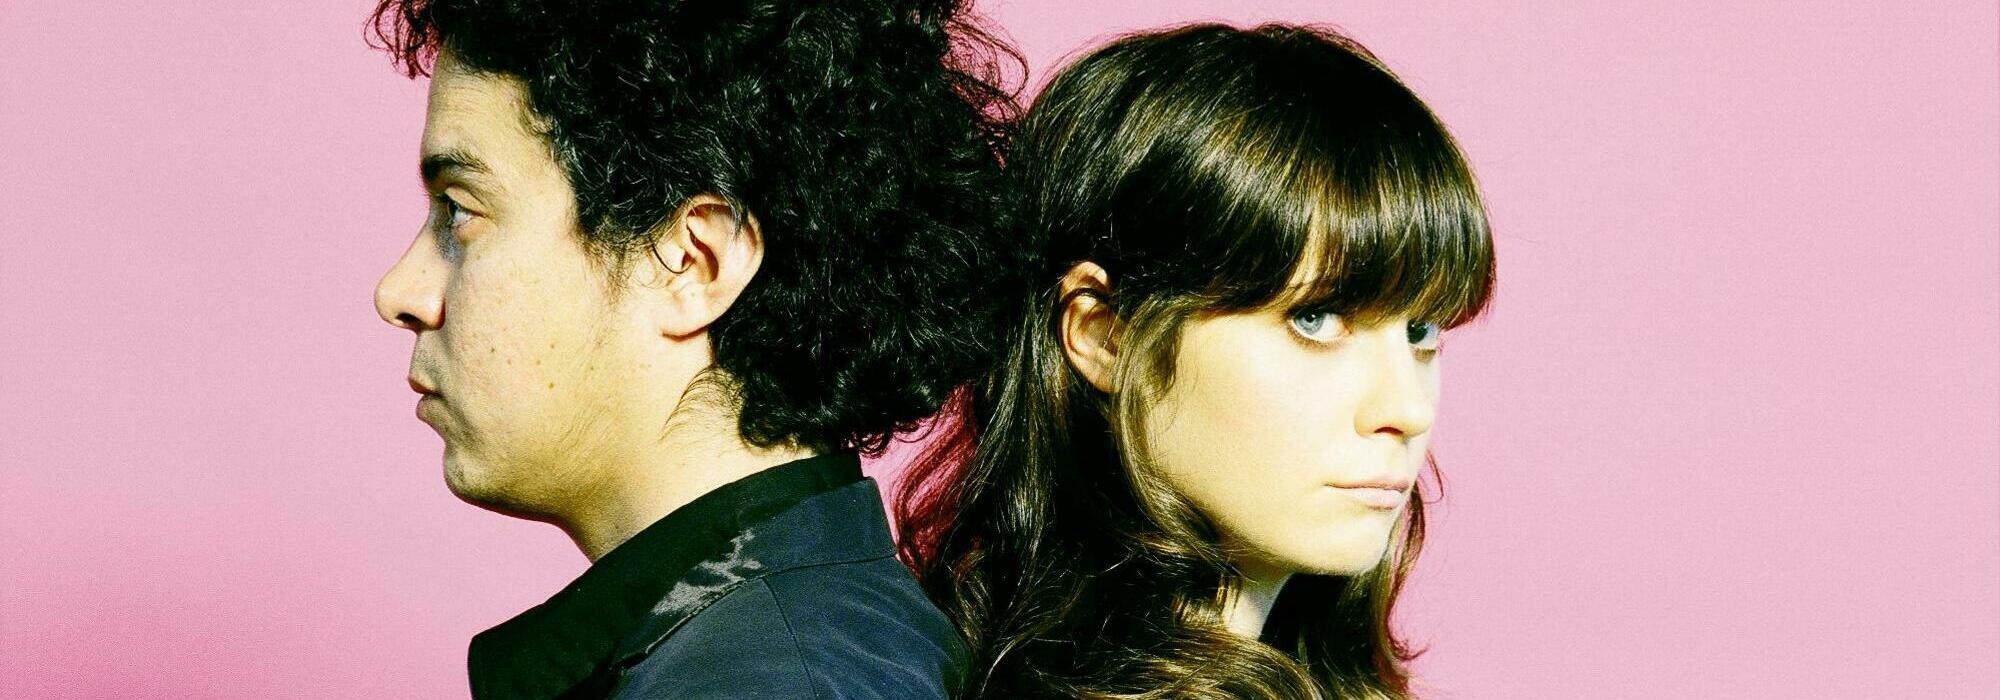 A She & Him live event